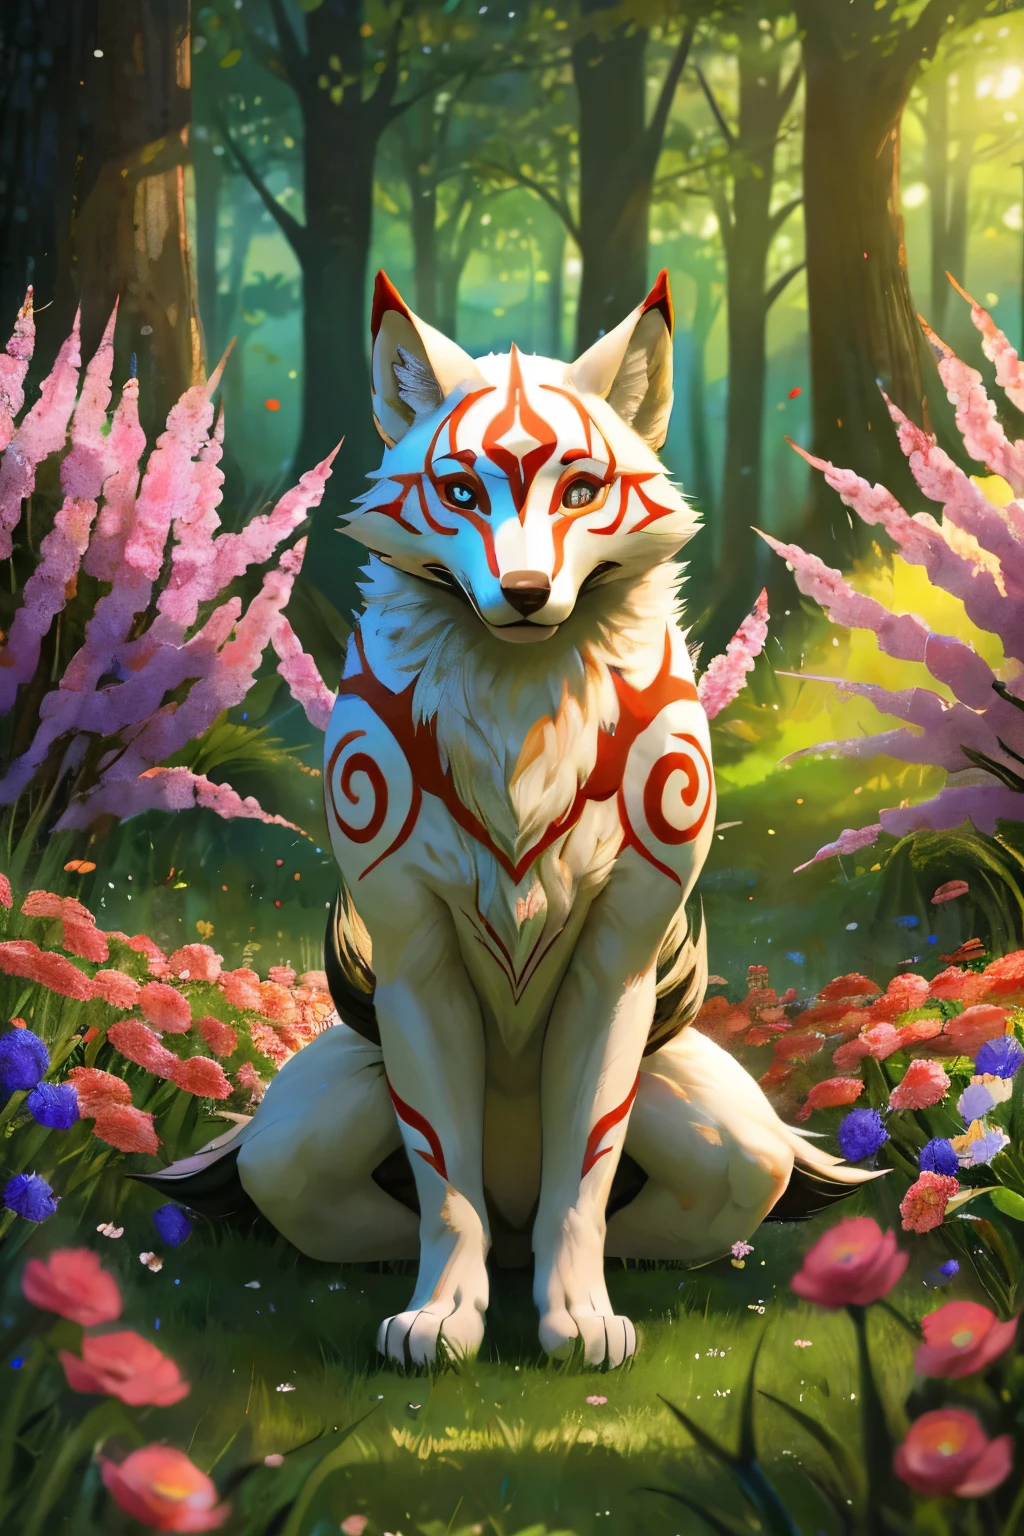 a beautiful wallpaper with a female amaterasu as the main subject, rendered in high resolution with ultra-detailed features. The amaterasu should have a realistic appearance, with detailed eyes, nose, and lips. The artwork should showcase a vibrant color palette, with vivid colors to bring the image to life. The lighting should be soft and natural, creating a warm and inviting atmosphere. Additionally, the amaterasu can be surrounded by a lush forest background, with trees, flowers, and other elements of nature adding depth to the scene. The overall aesthetic should have a nostalgic feel, reminiscent of classic video games.
